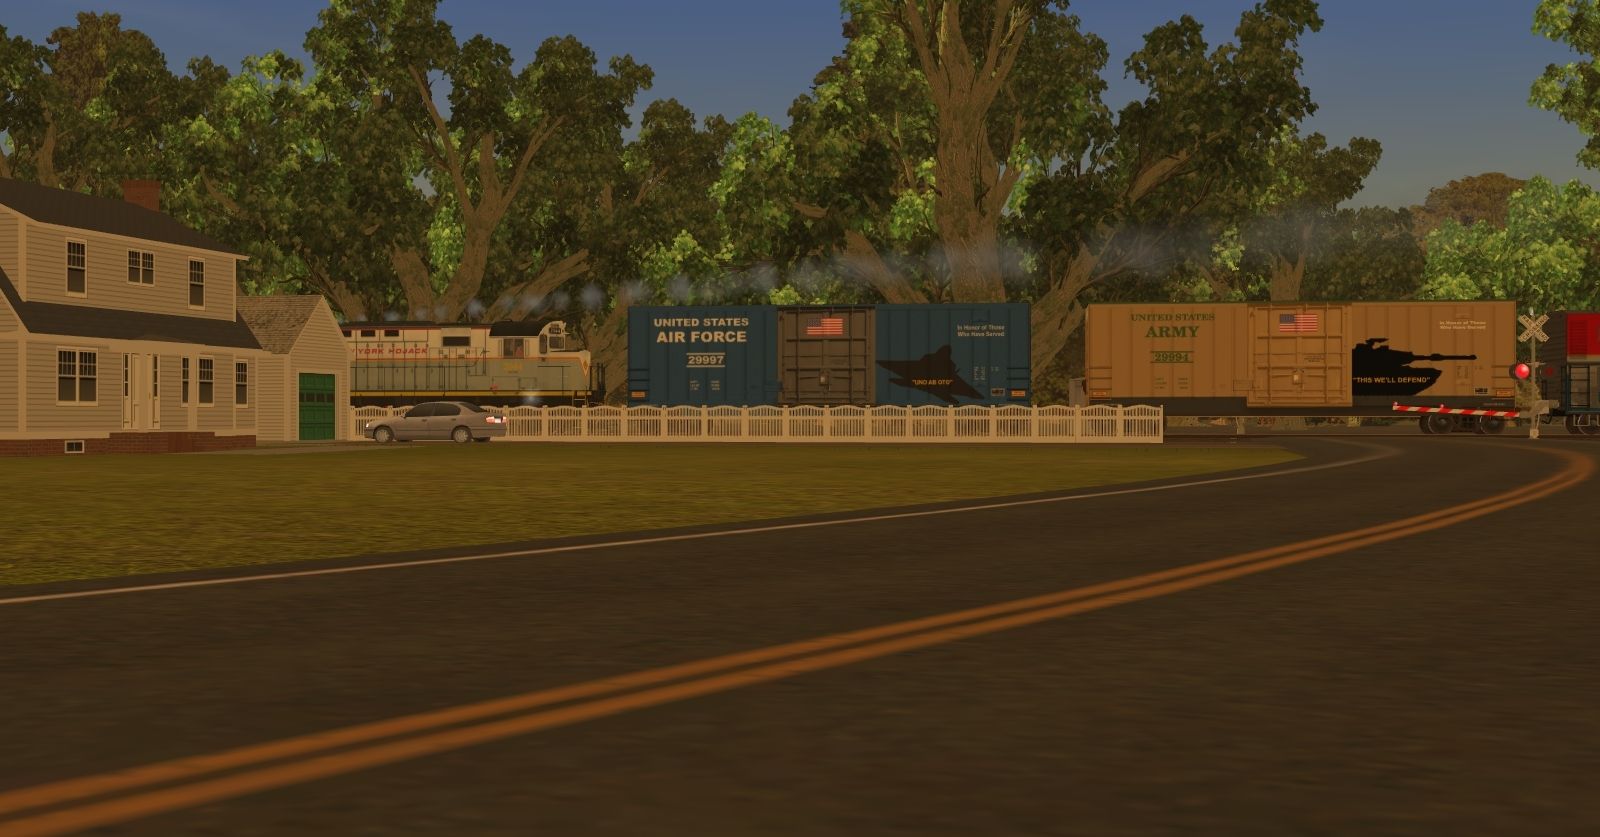 NYHT-celebrates-Memorial-Day-with-two-commemorative-boxcars-at-the-head-end-of-today%27s-local-freight.jpg